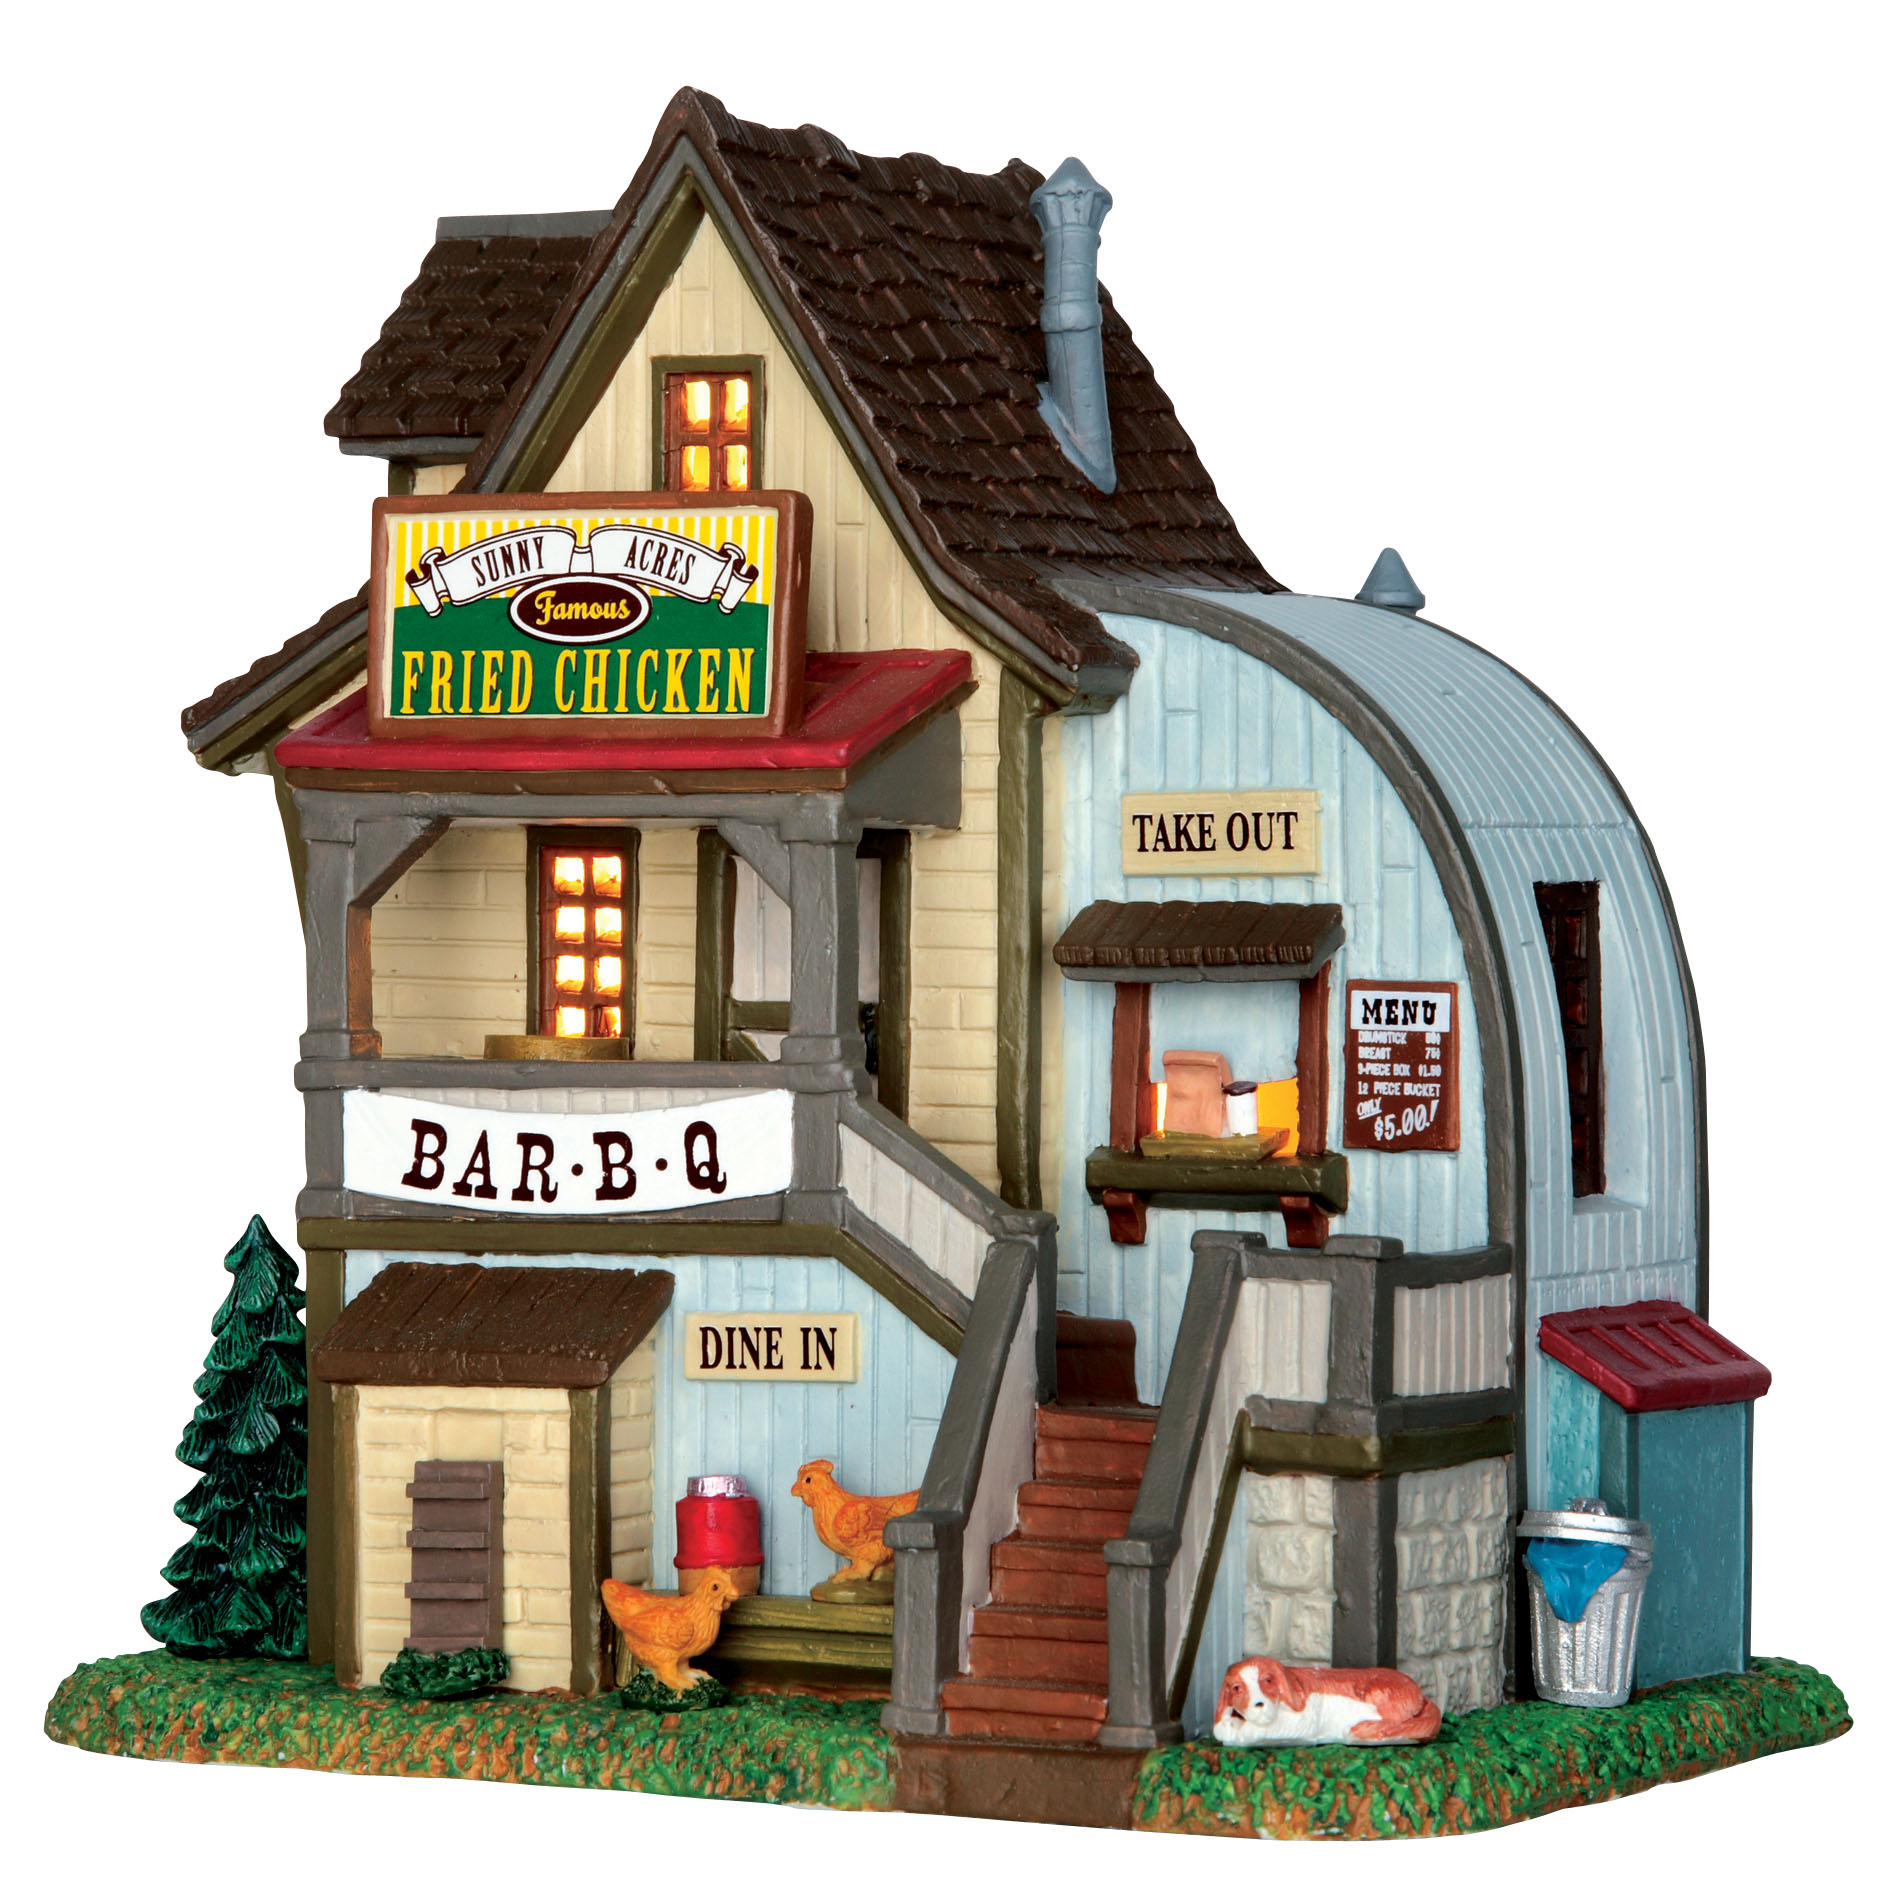 Lemax Village Collection Christmas Village Building, Sunny Acres Famous Fried Chicken